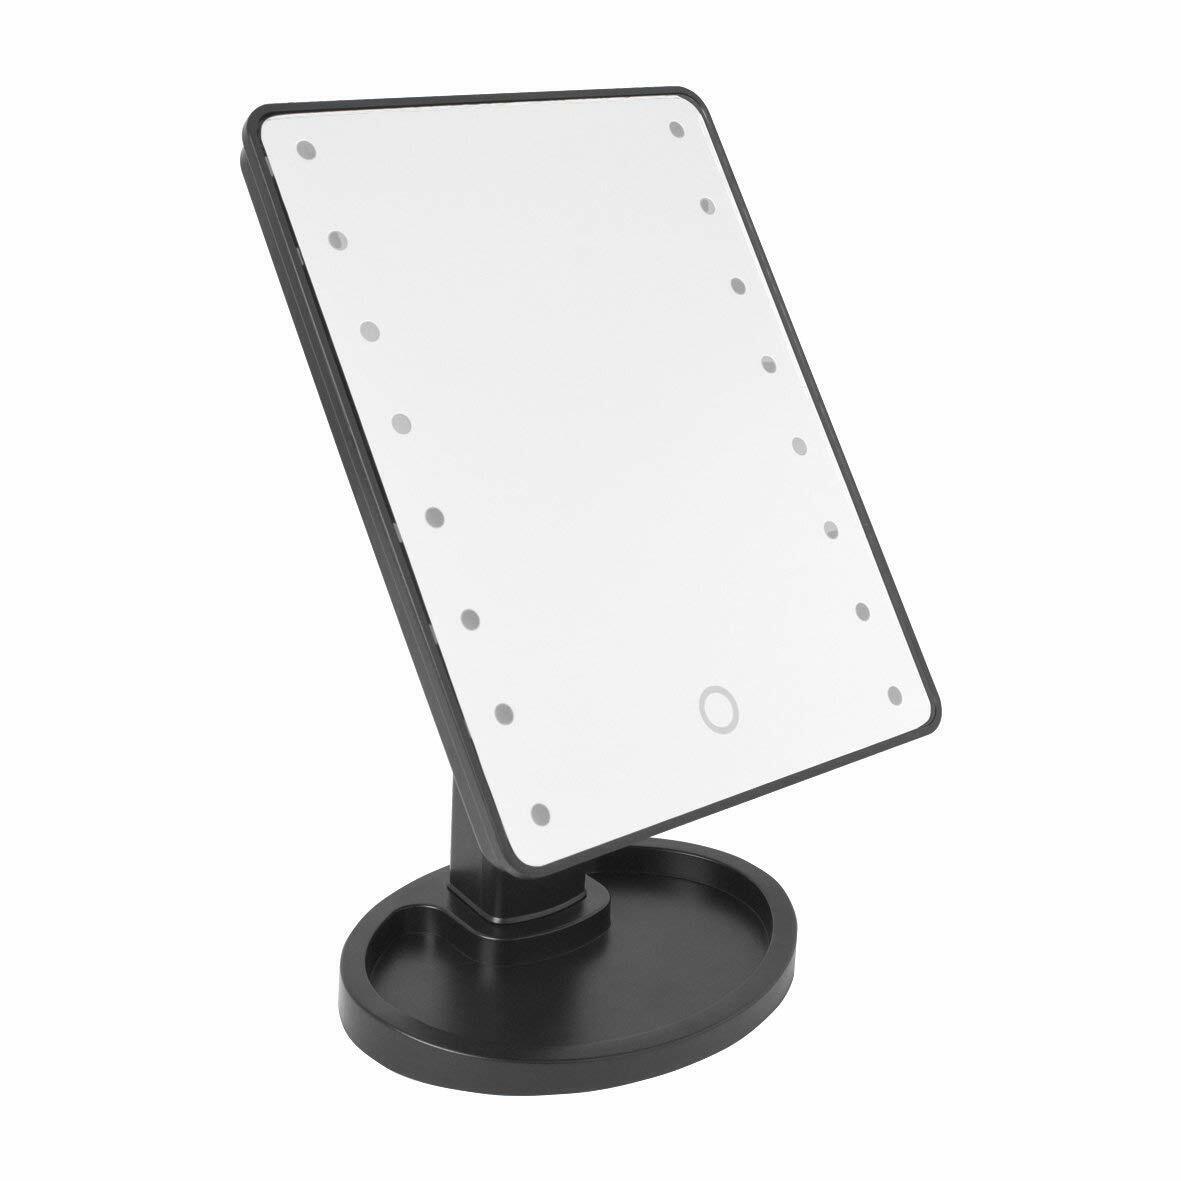 16 LED Light Magnifying Mirror Touch Screen Make Up Stand Table Beauty Cosmetic